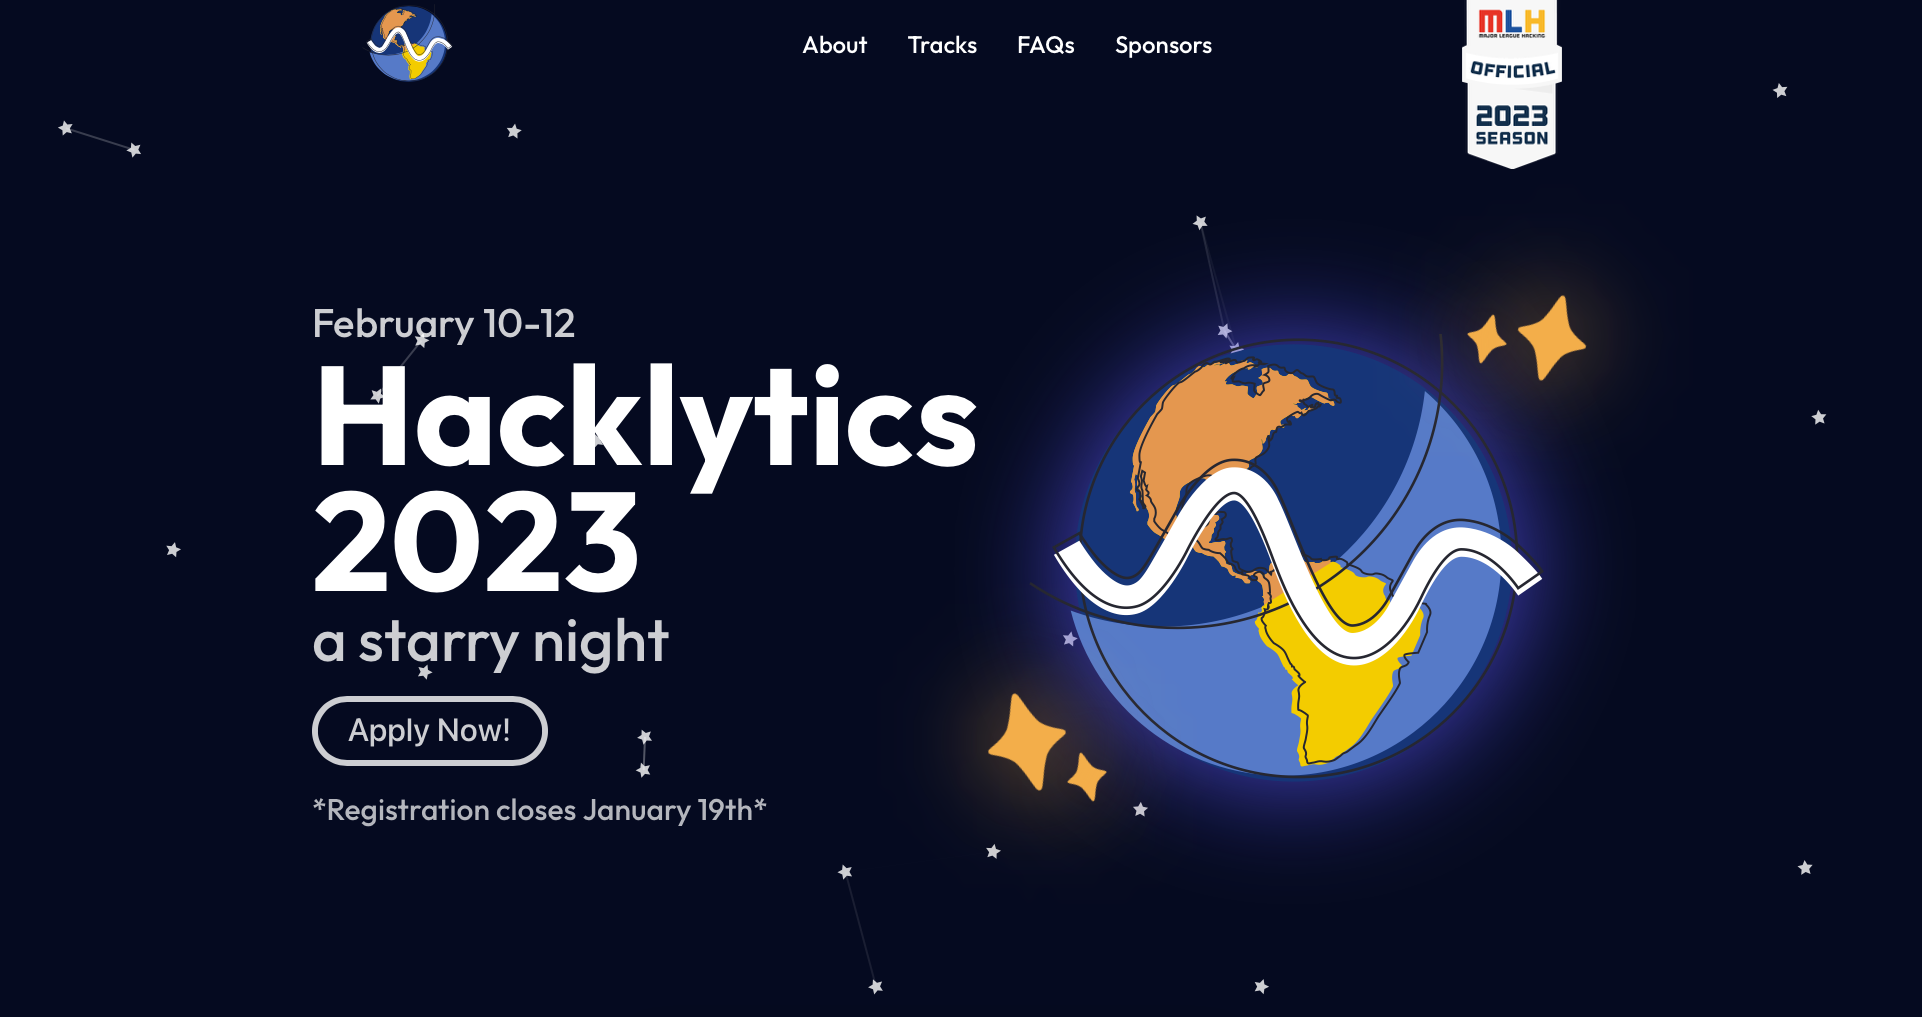 Hacklytics 2023: A Starry Night is organized by Data Science at GT and scheduled for Feb. 10 through 12.